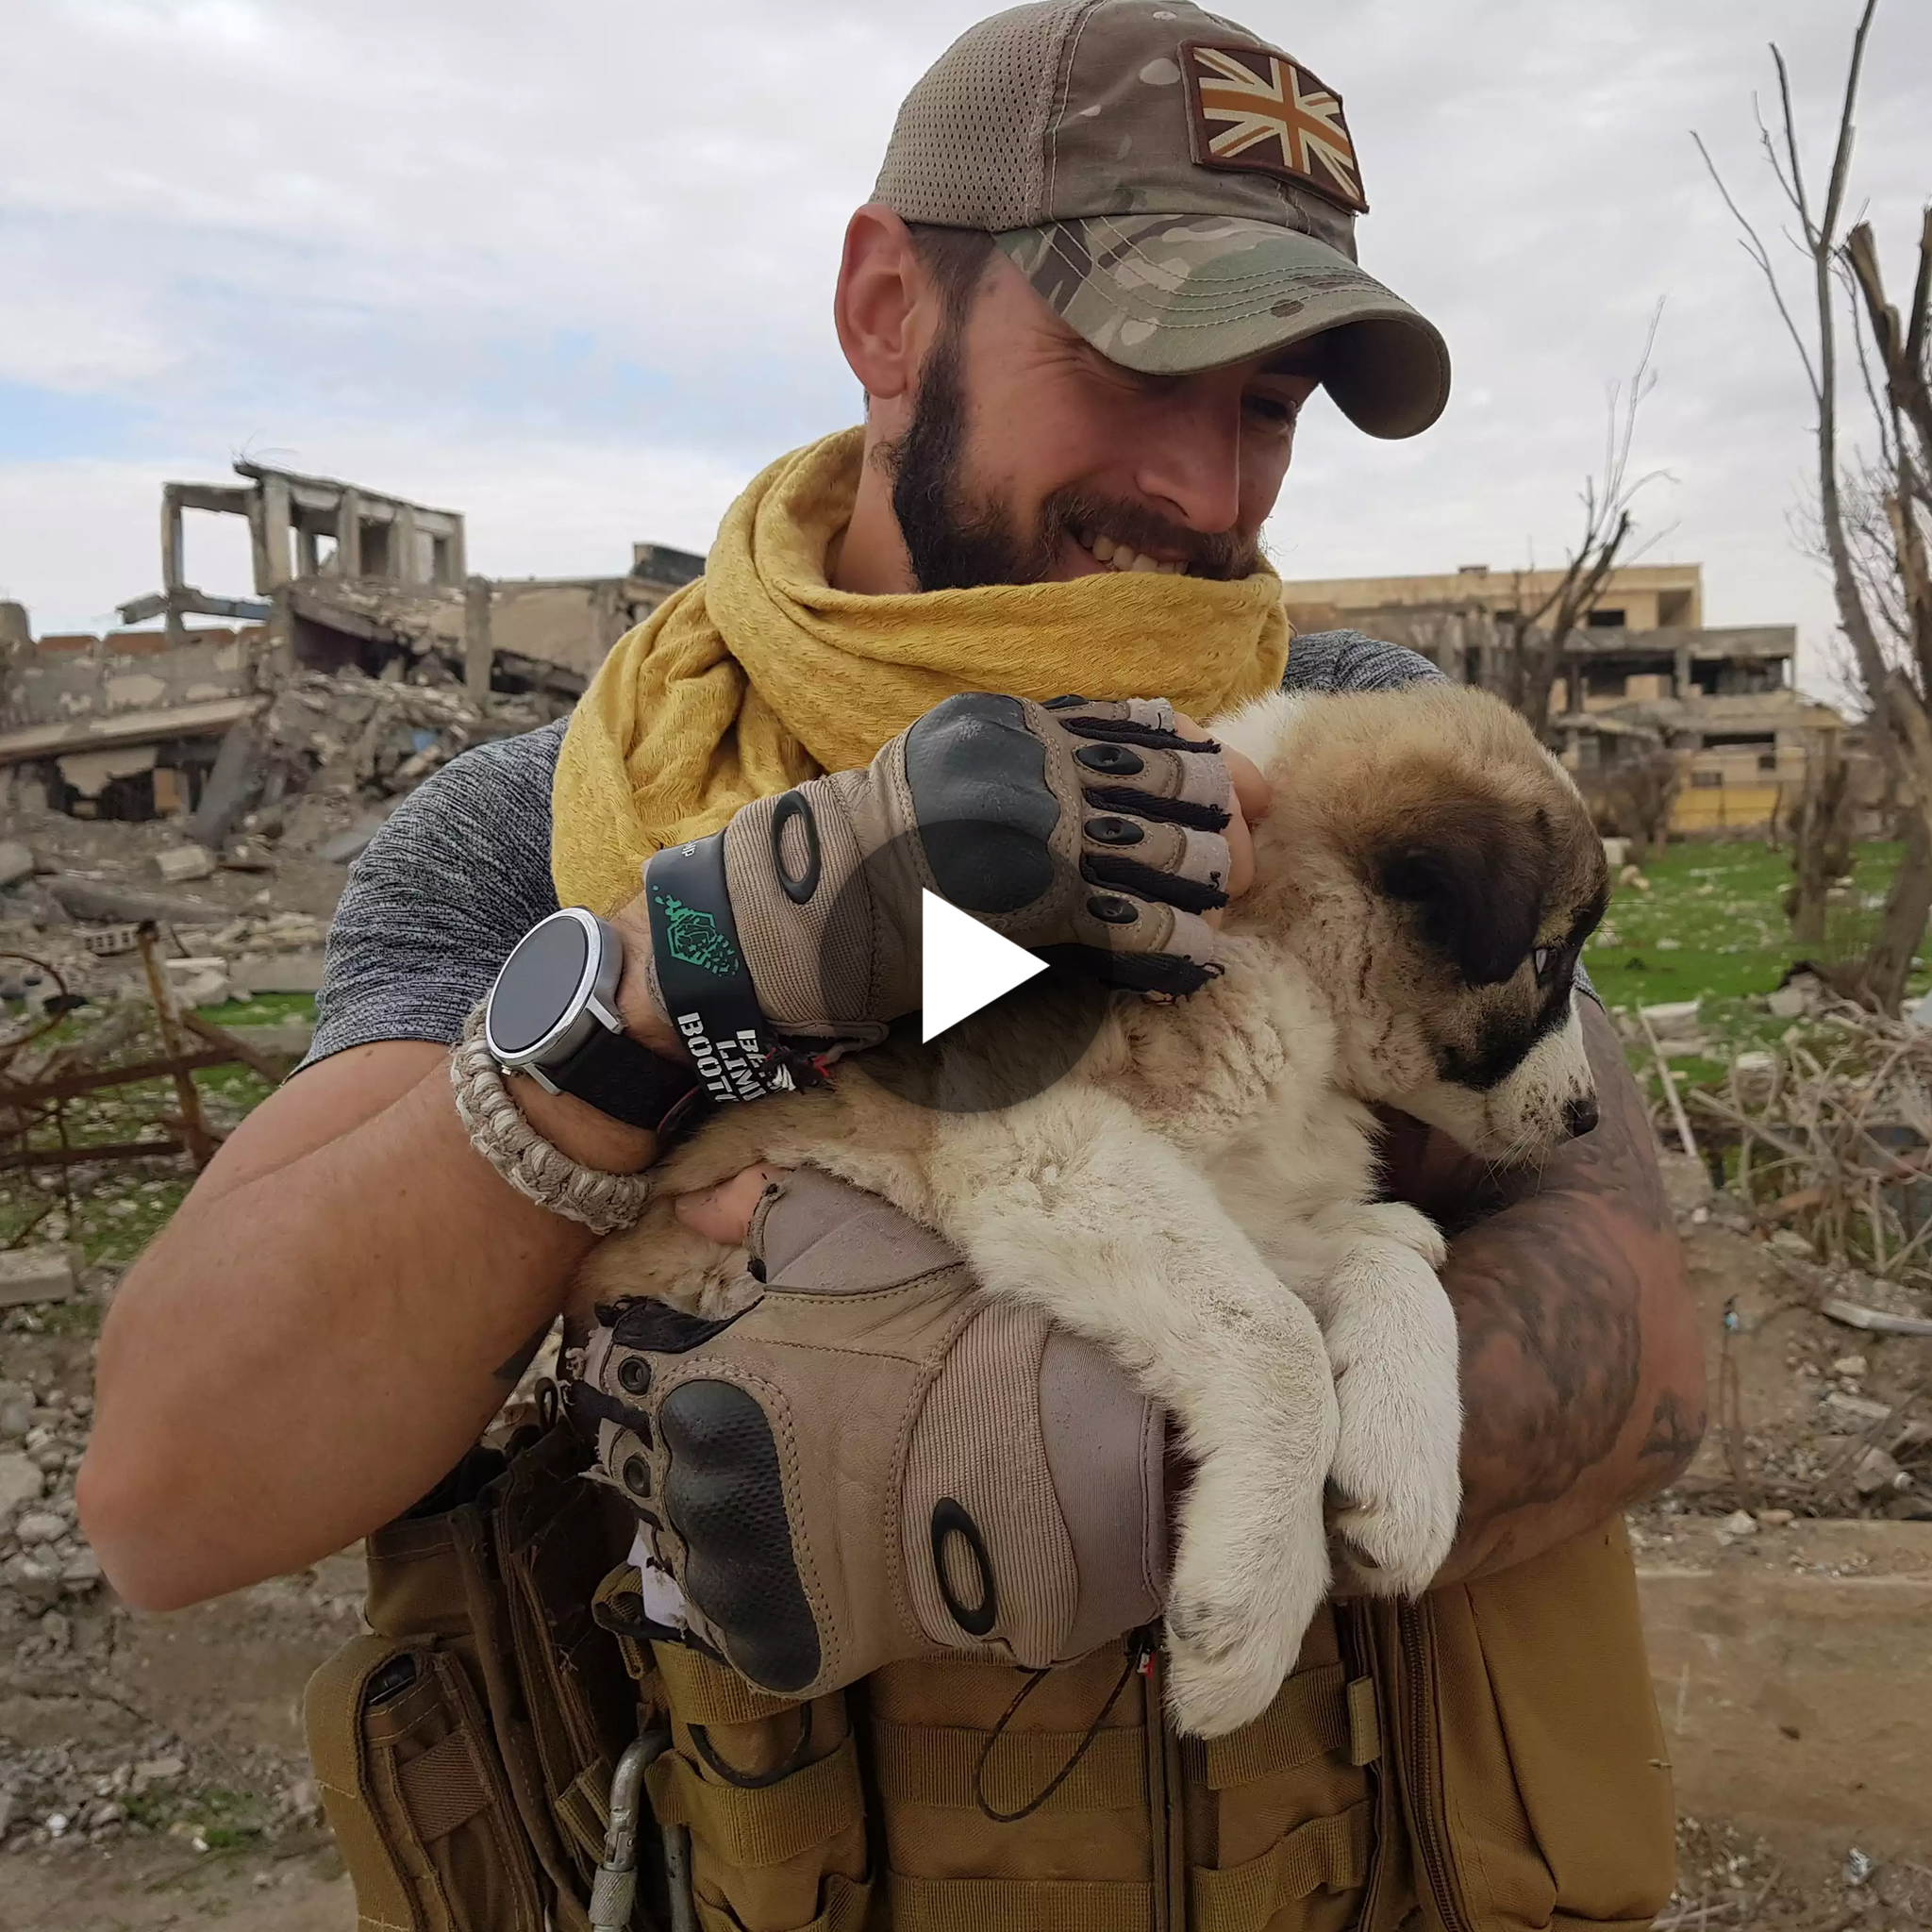 Finally, a lost puppy who has been searching for a hero meets him after traveling 5,000 kilometers to a military base in pursuit of a soldier. ‎